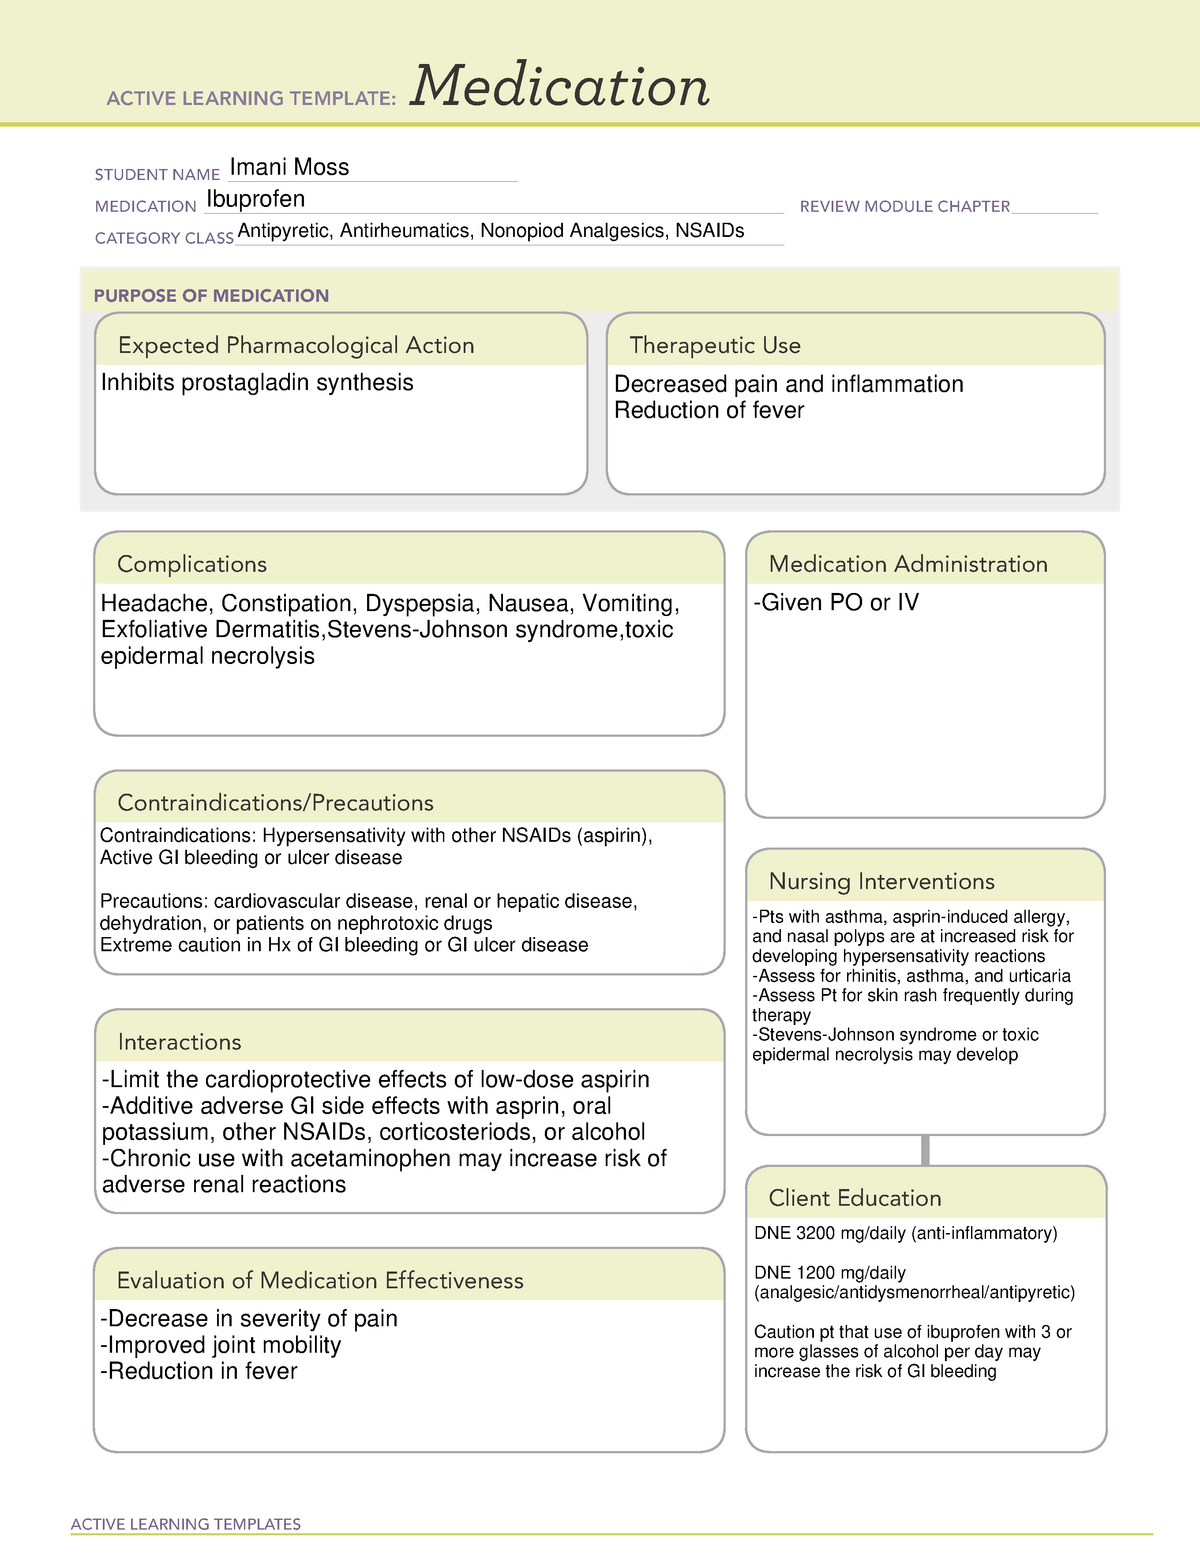 Ibuprofen template n/a ACTIVE LEARNING TEMPLATES Medication STUDENT